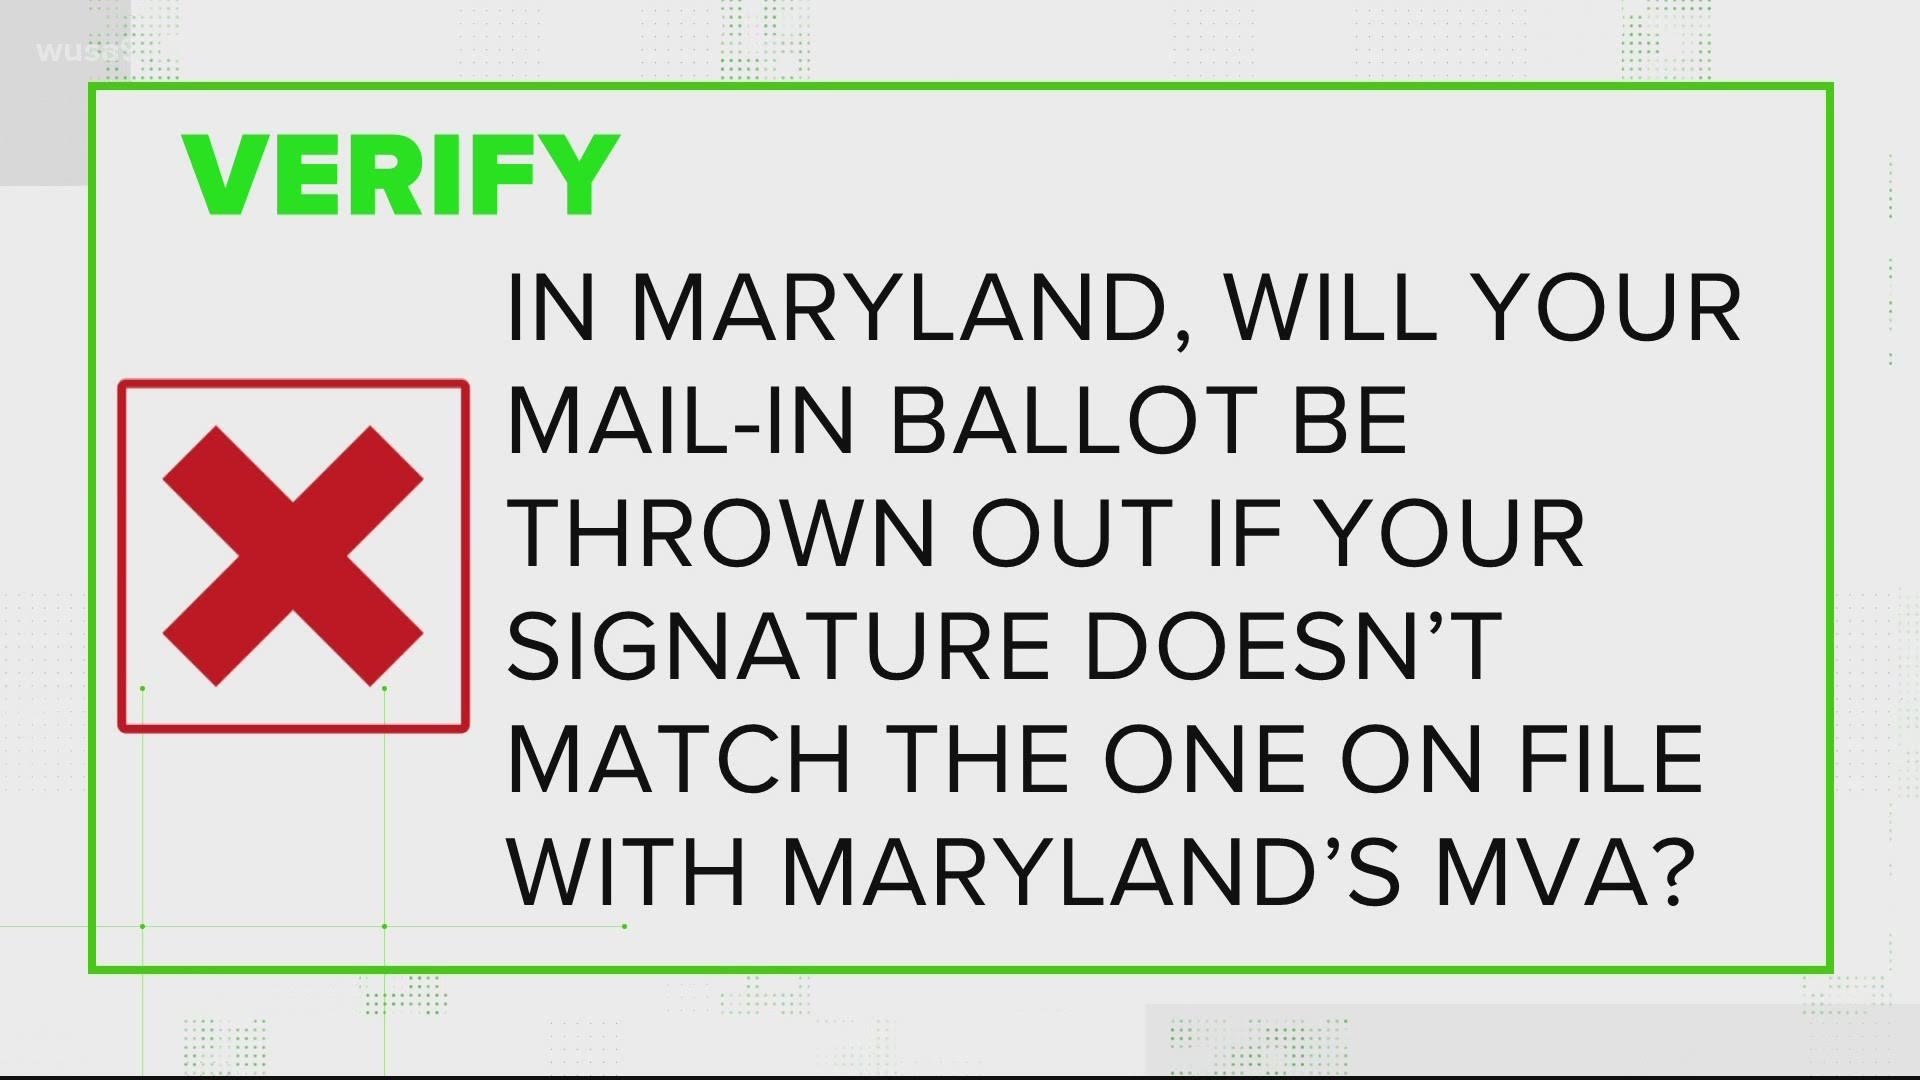 In D.C., your signature will be compared to the one on your original voter registration.